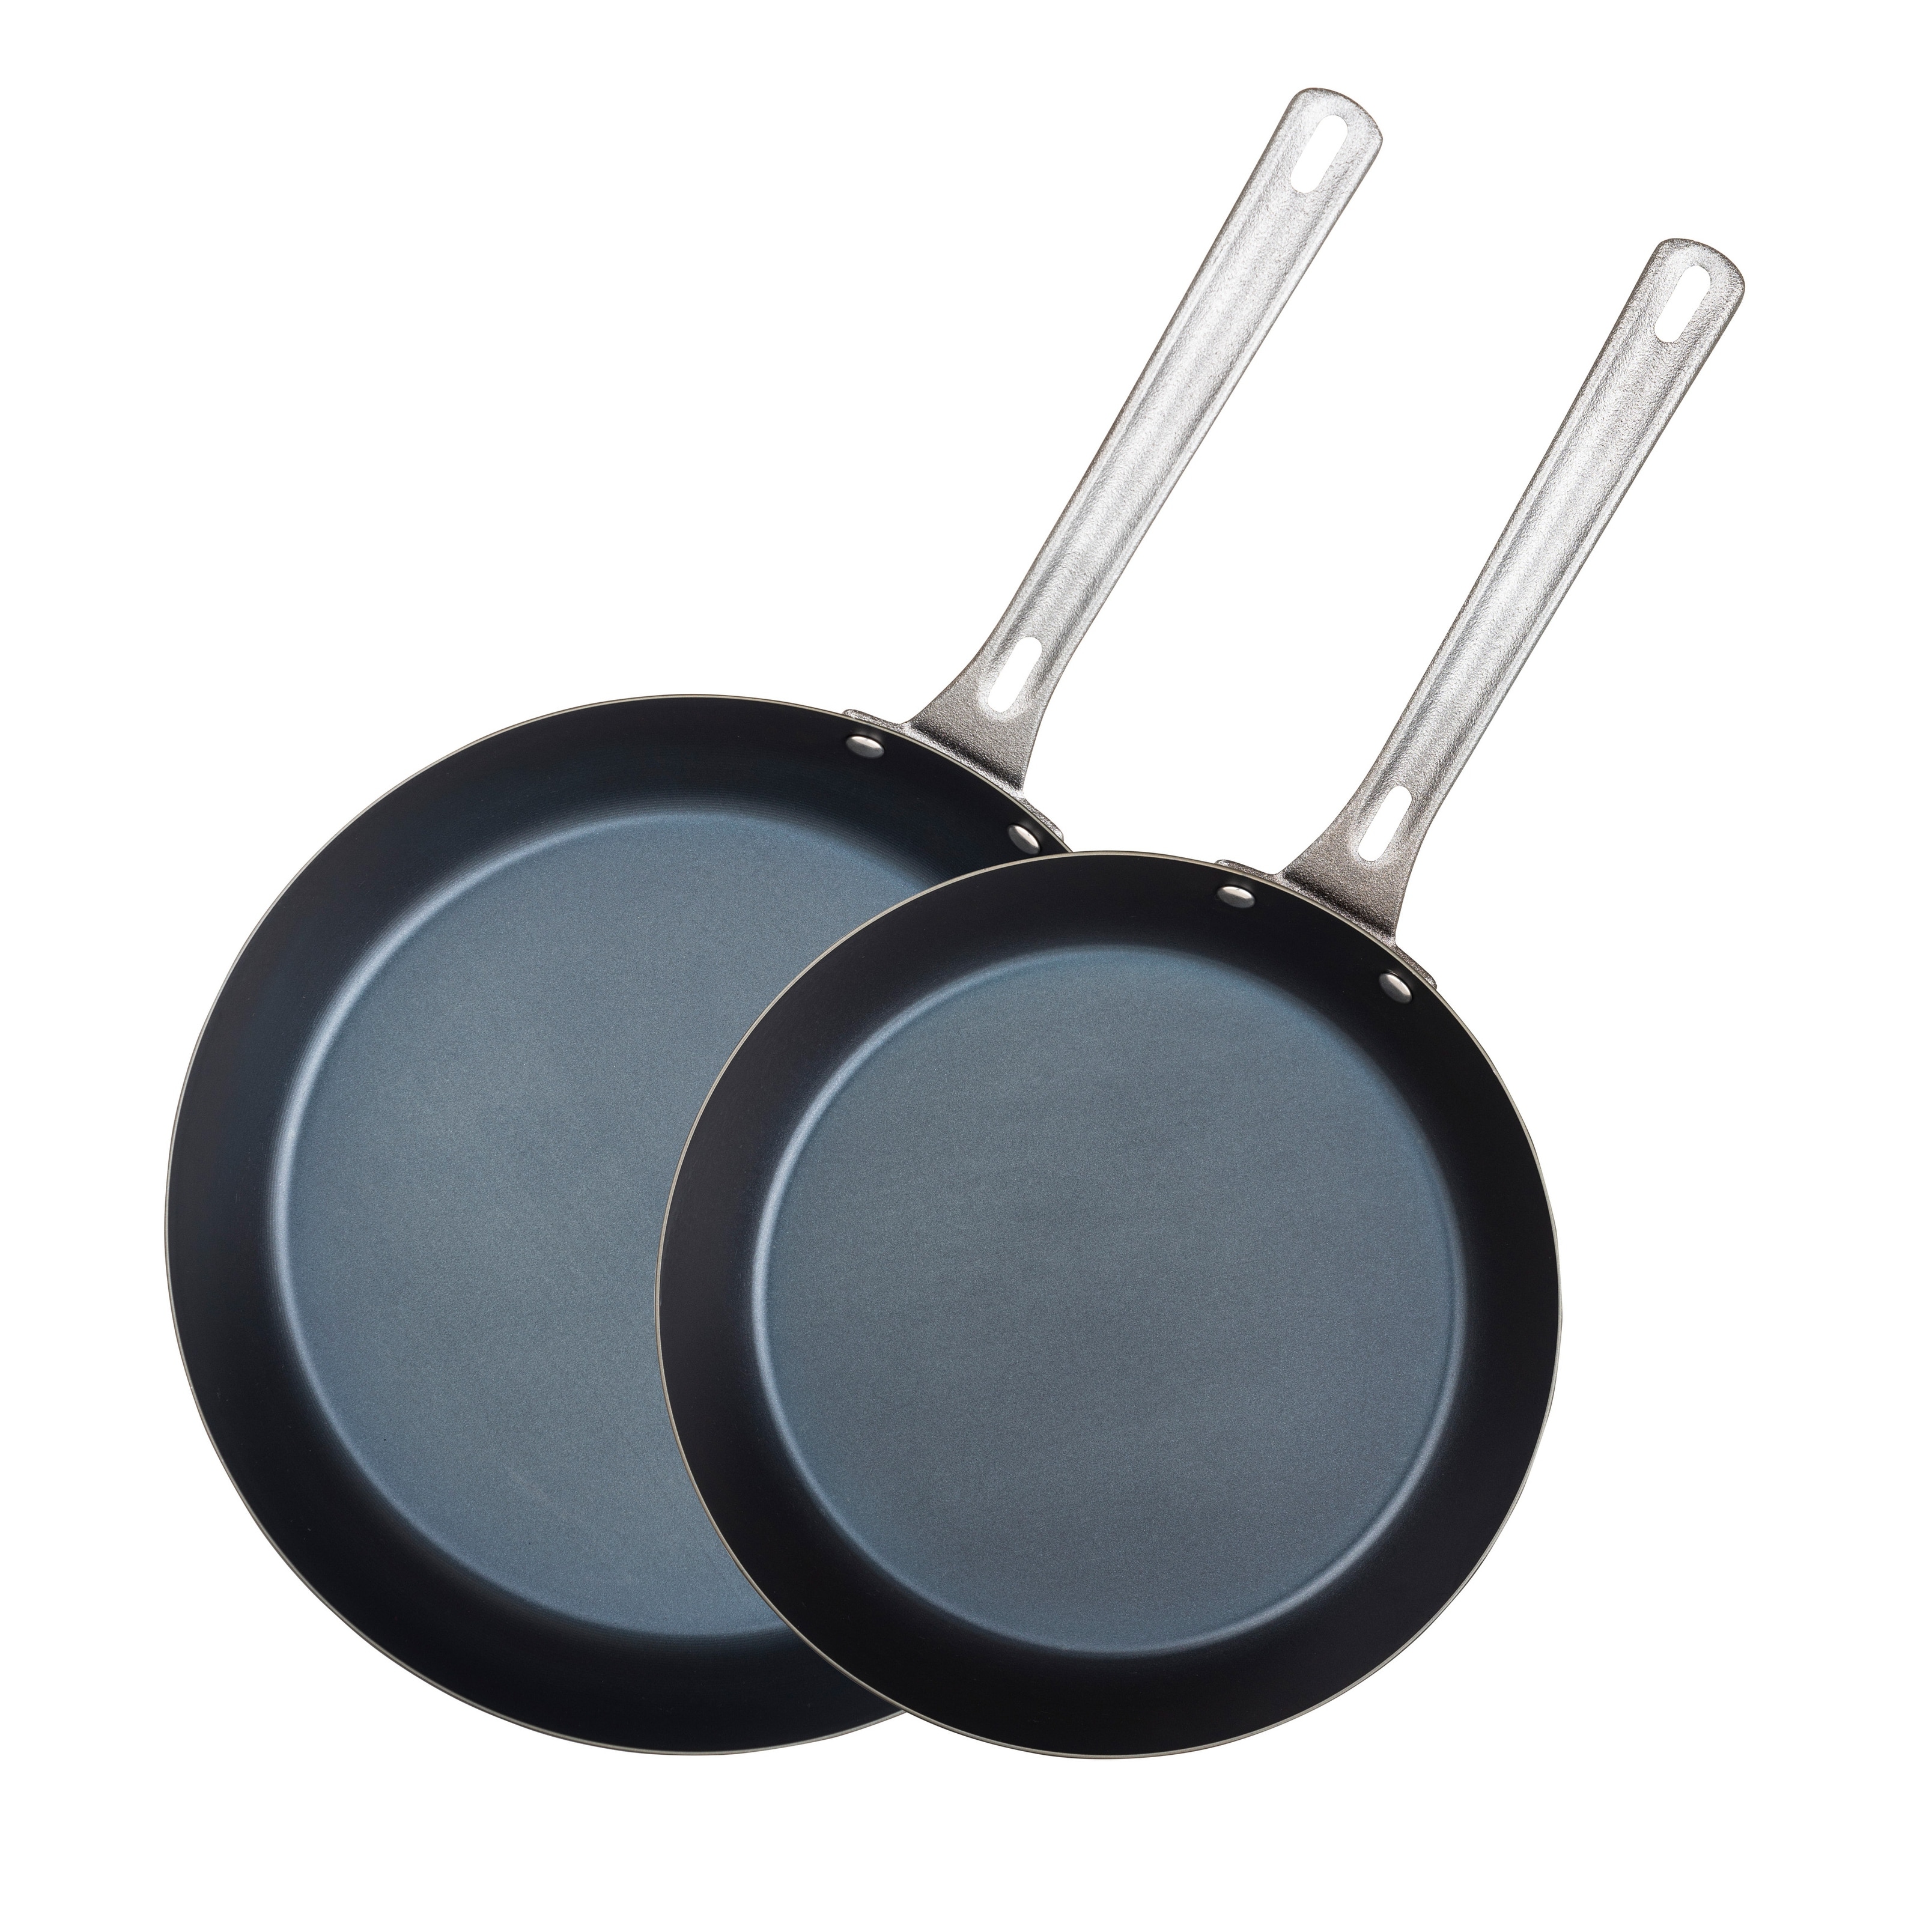 https://ak1.ostkcdn.com/images/products/is/images/direct/9e5e5aef7ff618f4240f6be7a0c2f753537a5a4c/Viking-2-Piece-Blue-Carbon-Steel-Fry-Pan-Set.jpg